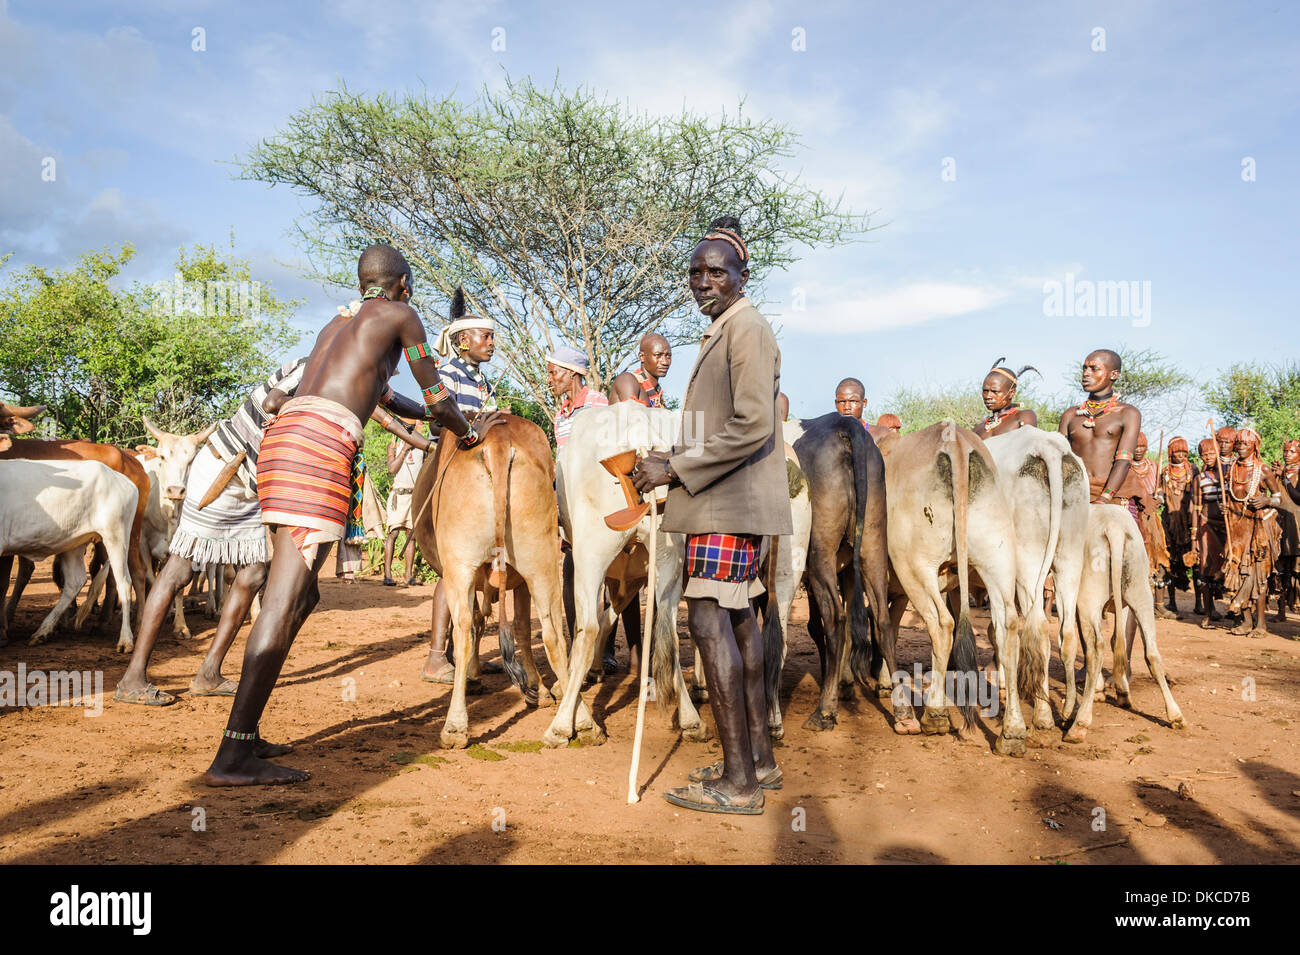 Gathering the cattle for a bull jumping ceremony. A rite of passage from boys to men. Hamer tribe, Omo valley, Ethiopia Stock Photo